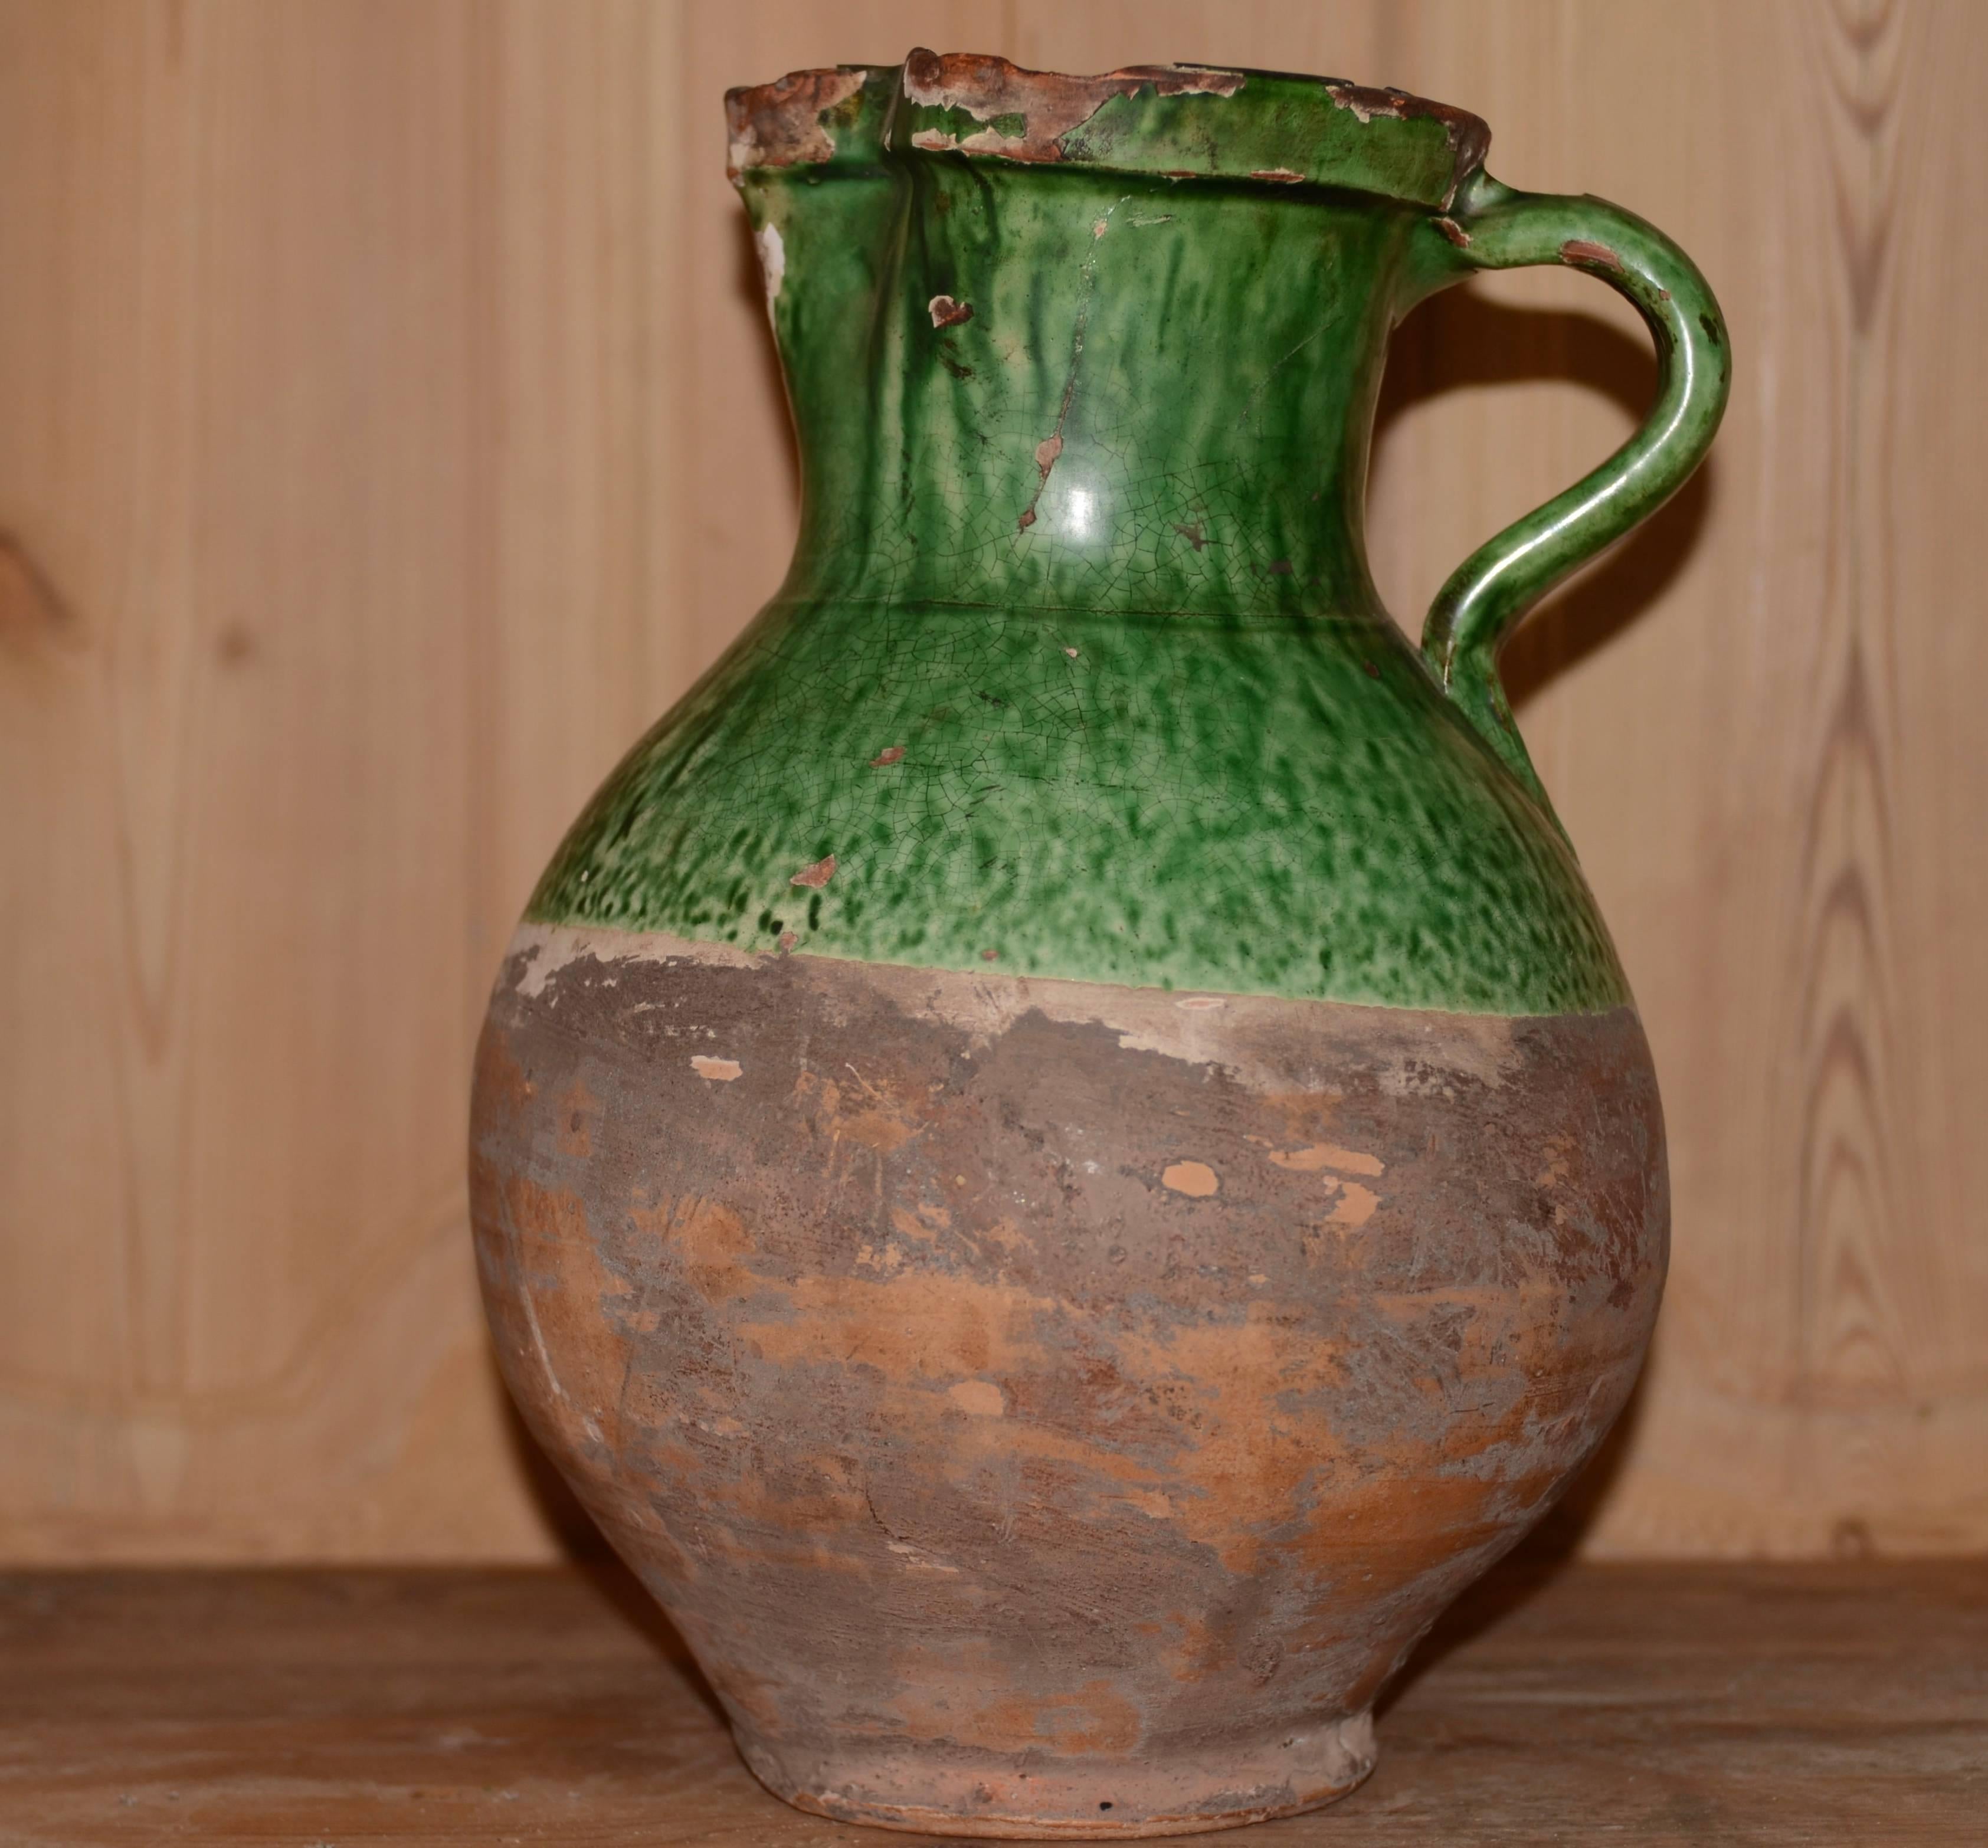 19th Century French Green Glazed Pichet / Pitcher In Good Condition For Sale In Encinitas, CA